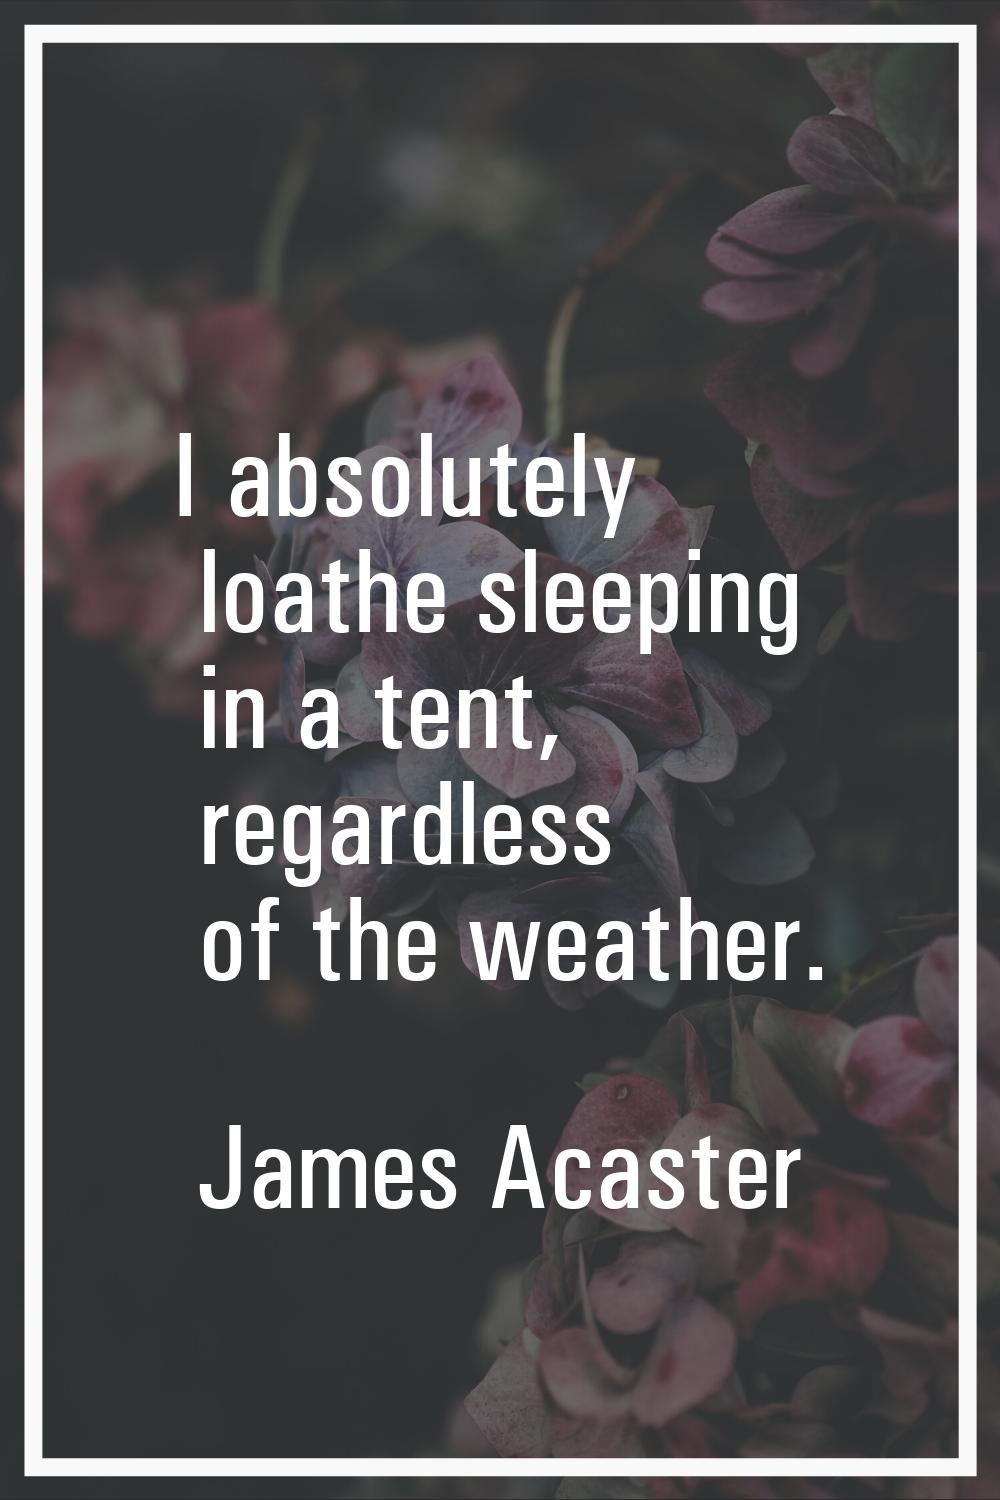 I absolutely loathe sleeping in a tent, regardless of the weather.